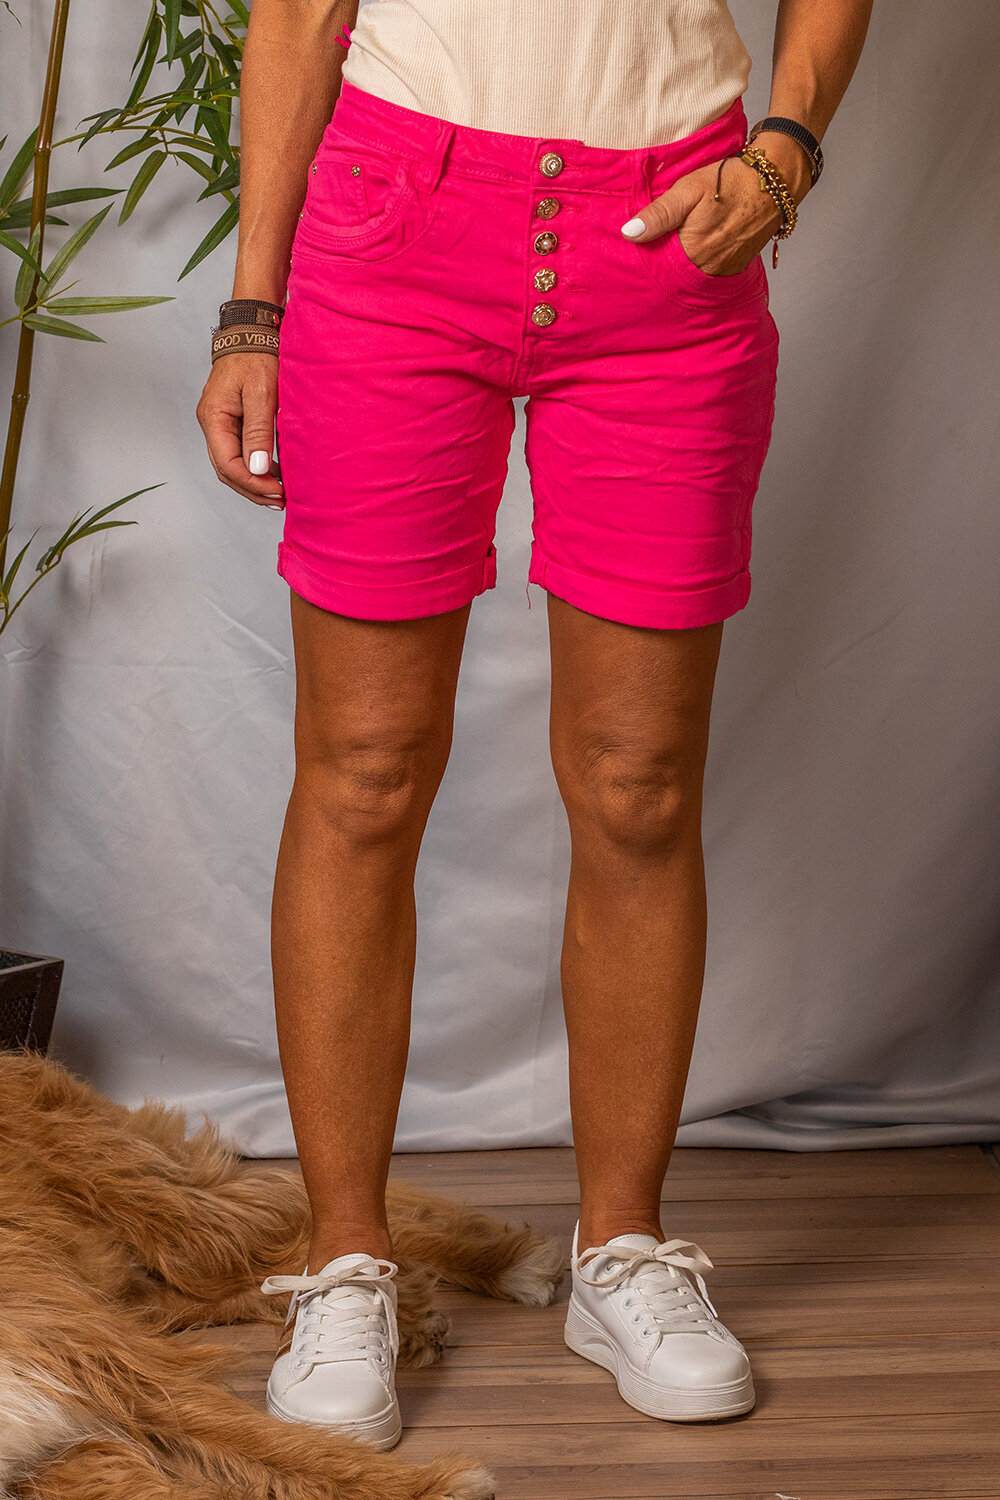 Shorts 1859 - Gold Buttons - Cerise